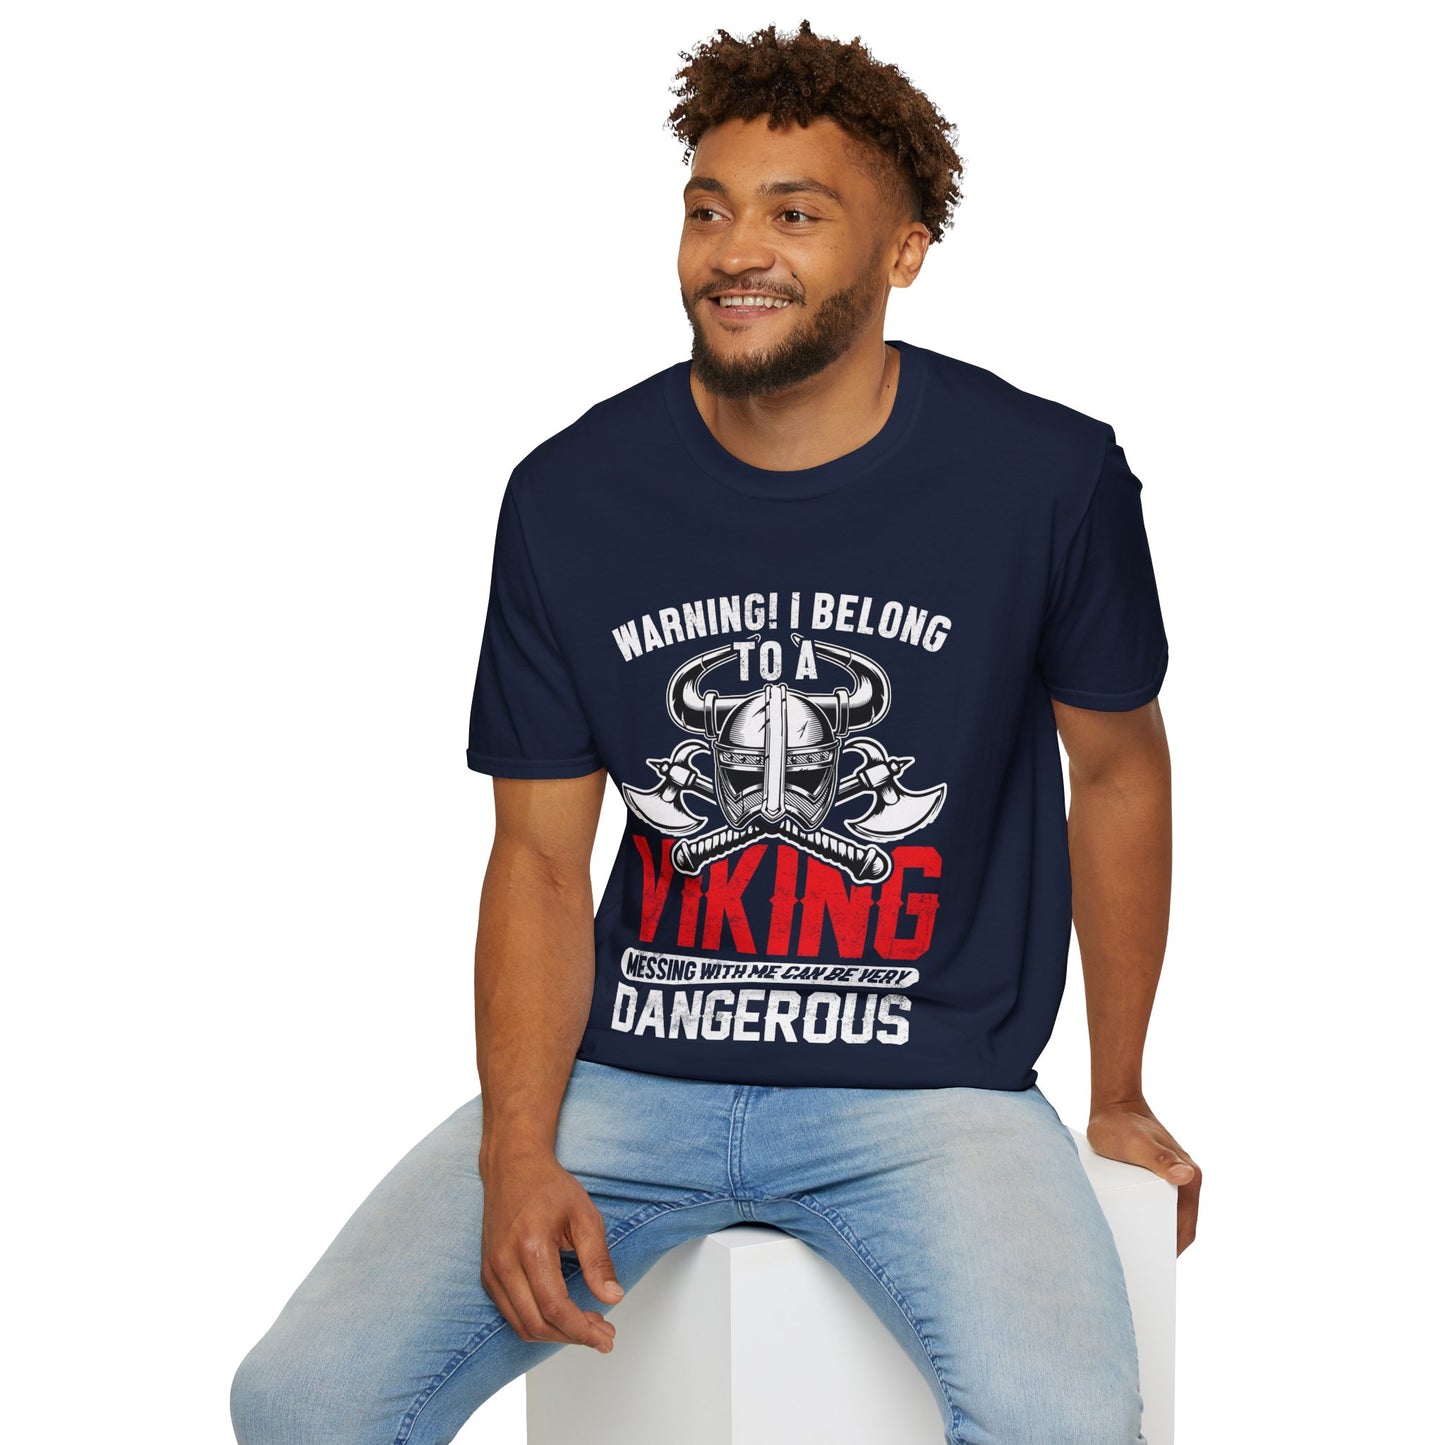 Warning! I Belong To A Viking Messing With Me Can Be Very Dangerous T-Shirt